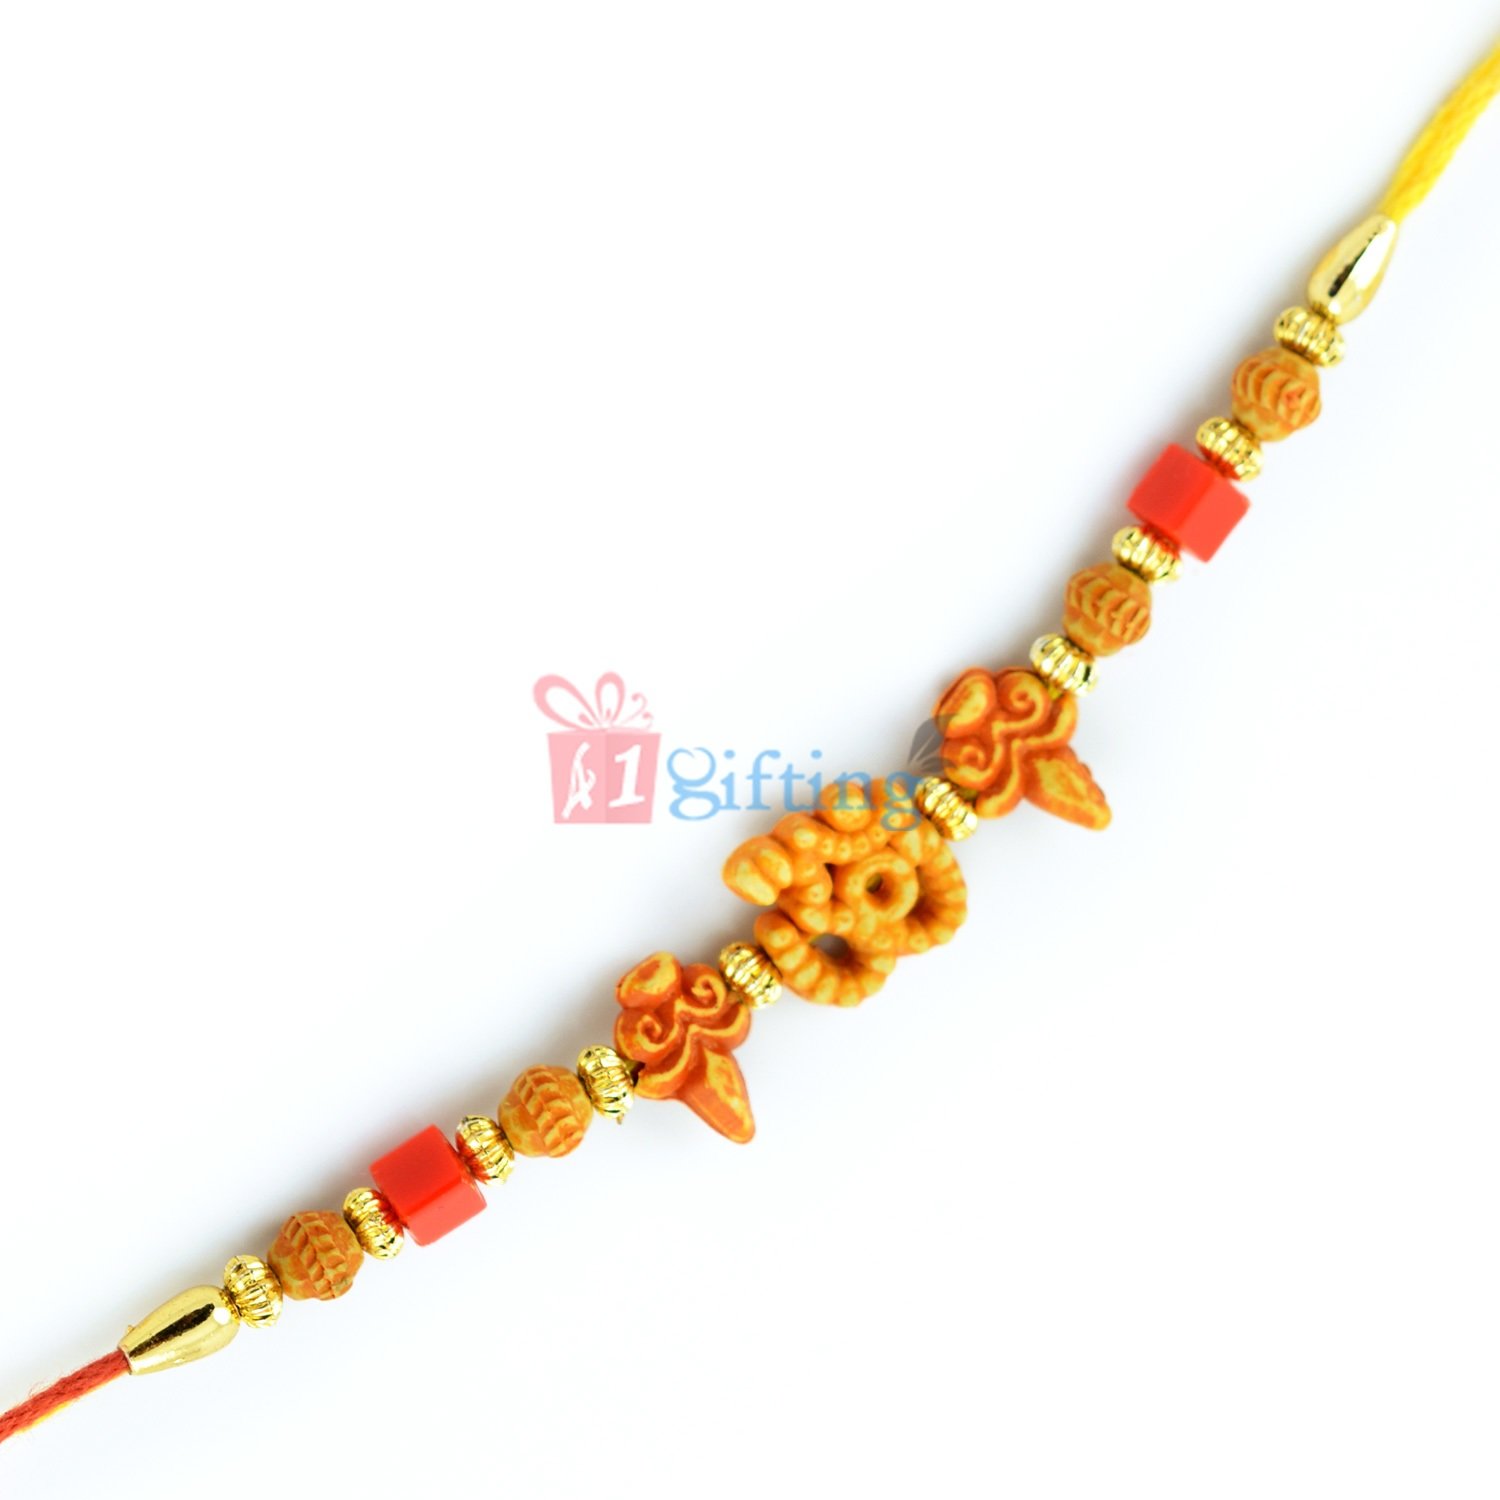 Auspicious Shiva Blessings - Rakhi Thread with Color, Swastik n Golden Beads